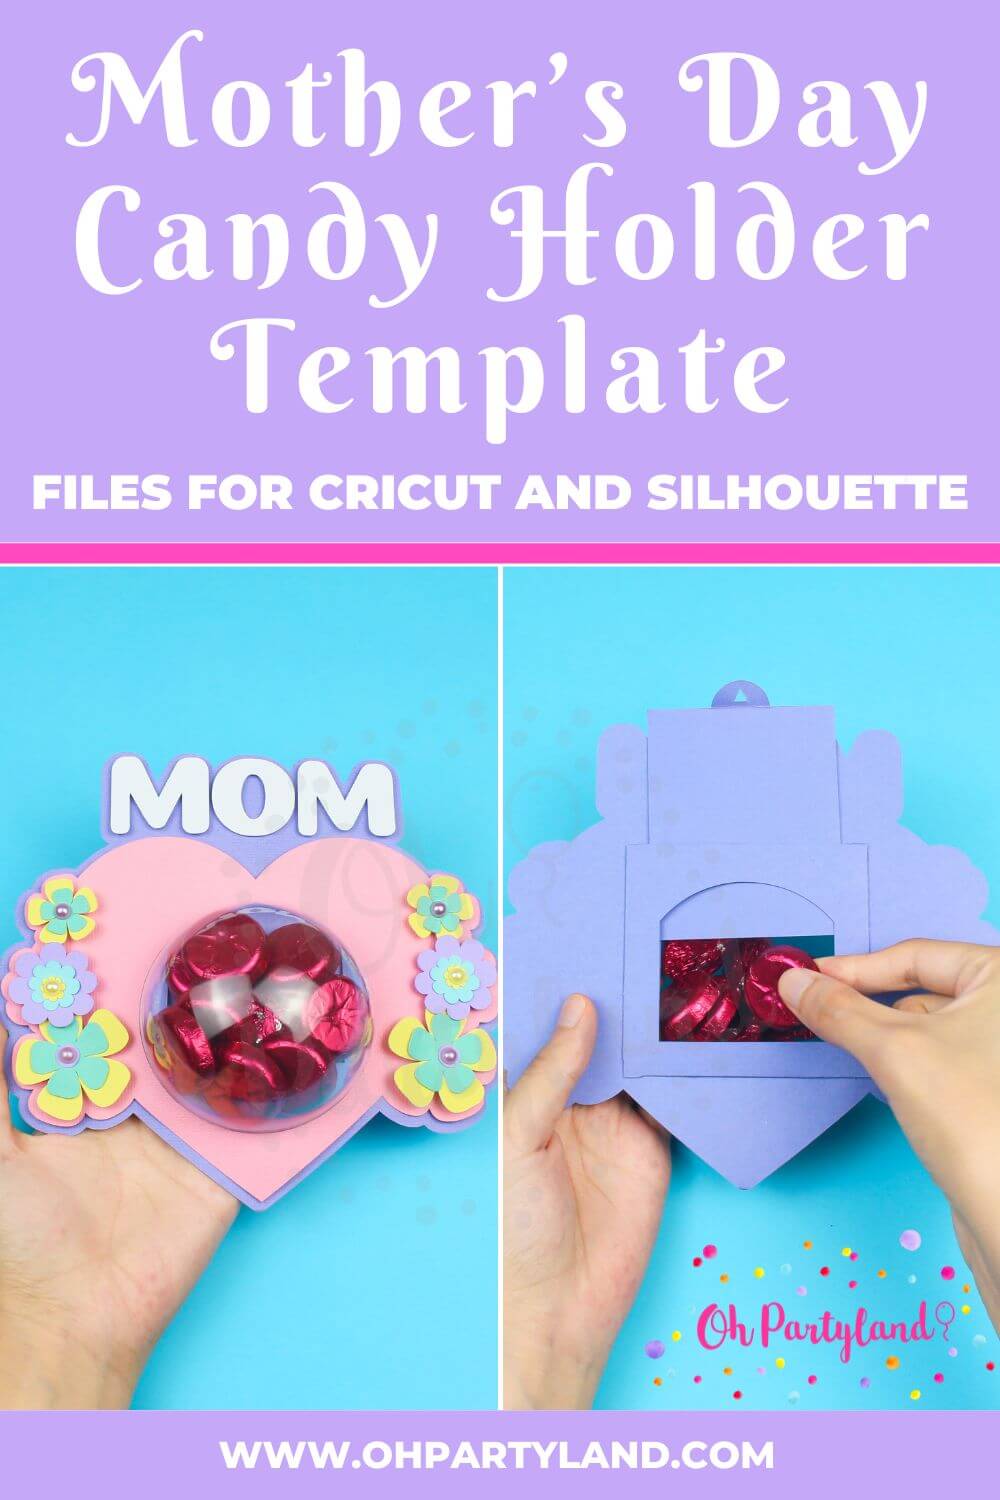 Mother's day Candy holder template